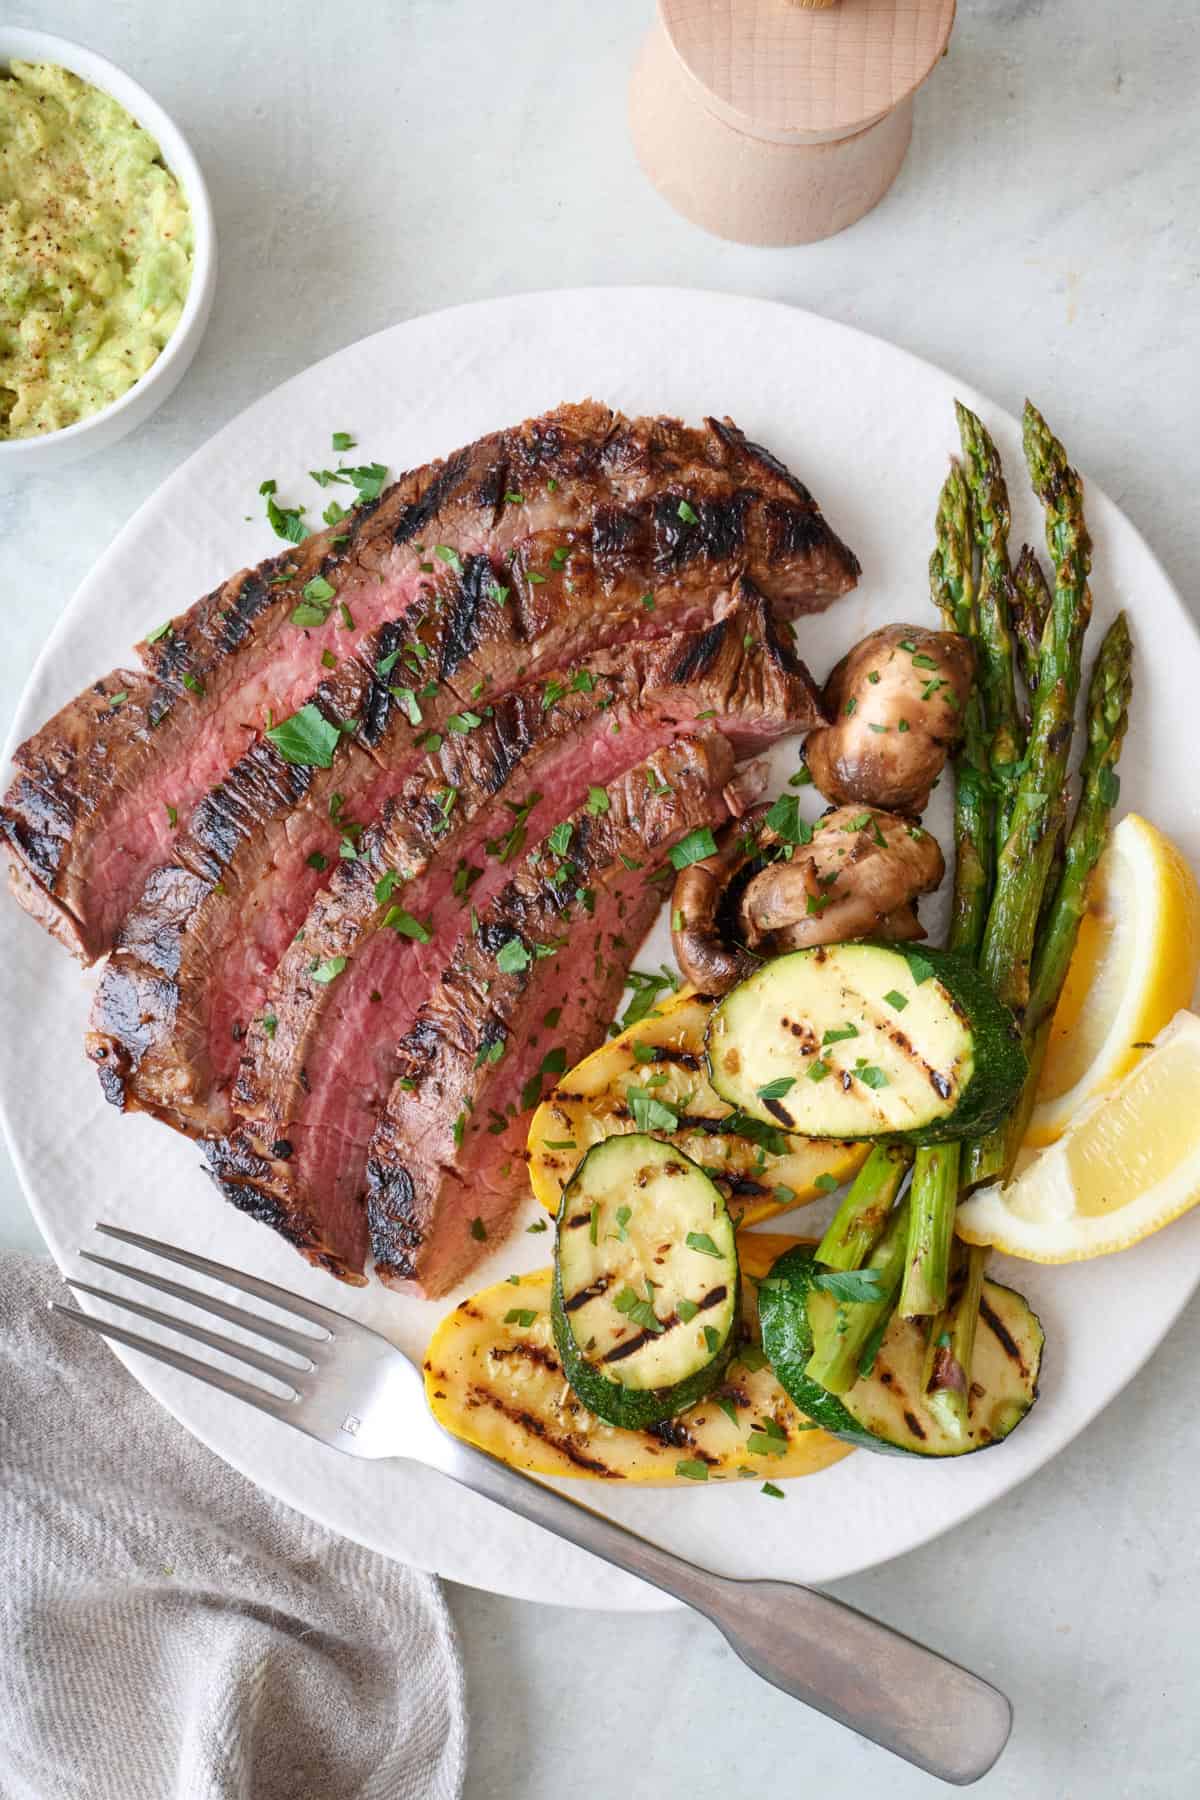 Grilled flank steak on a plate with grilled vegetables.